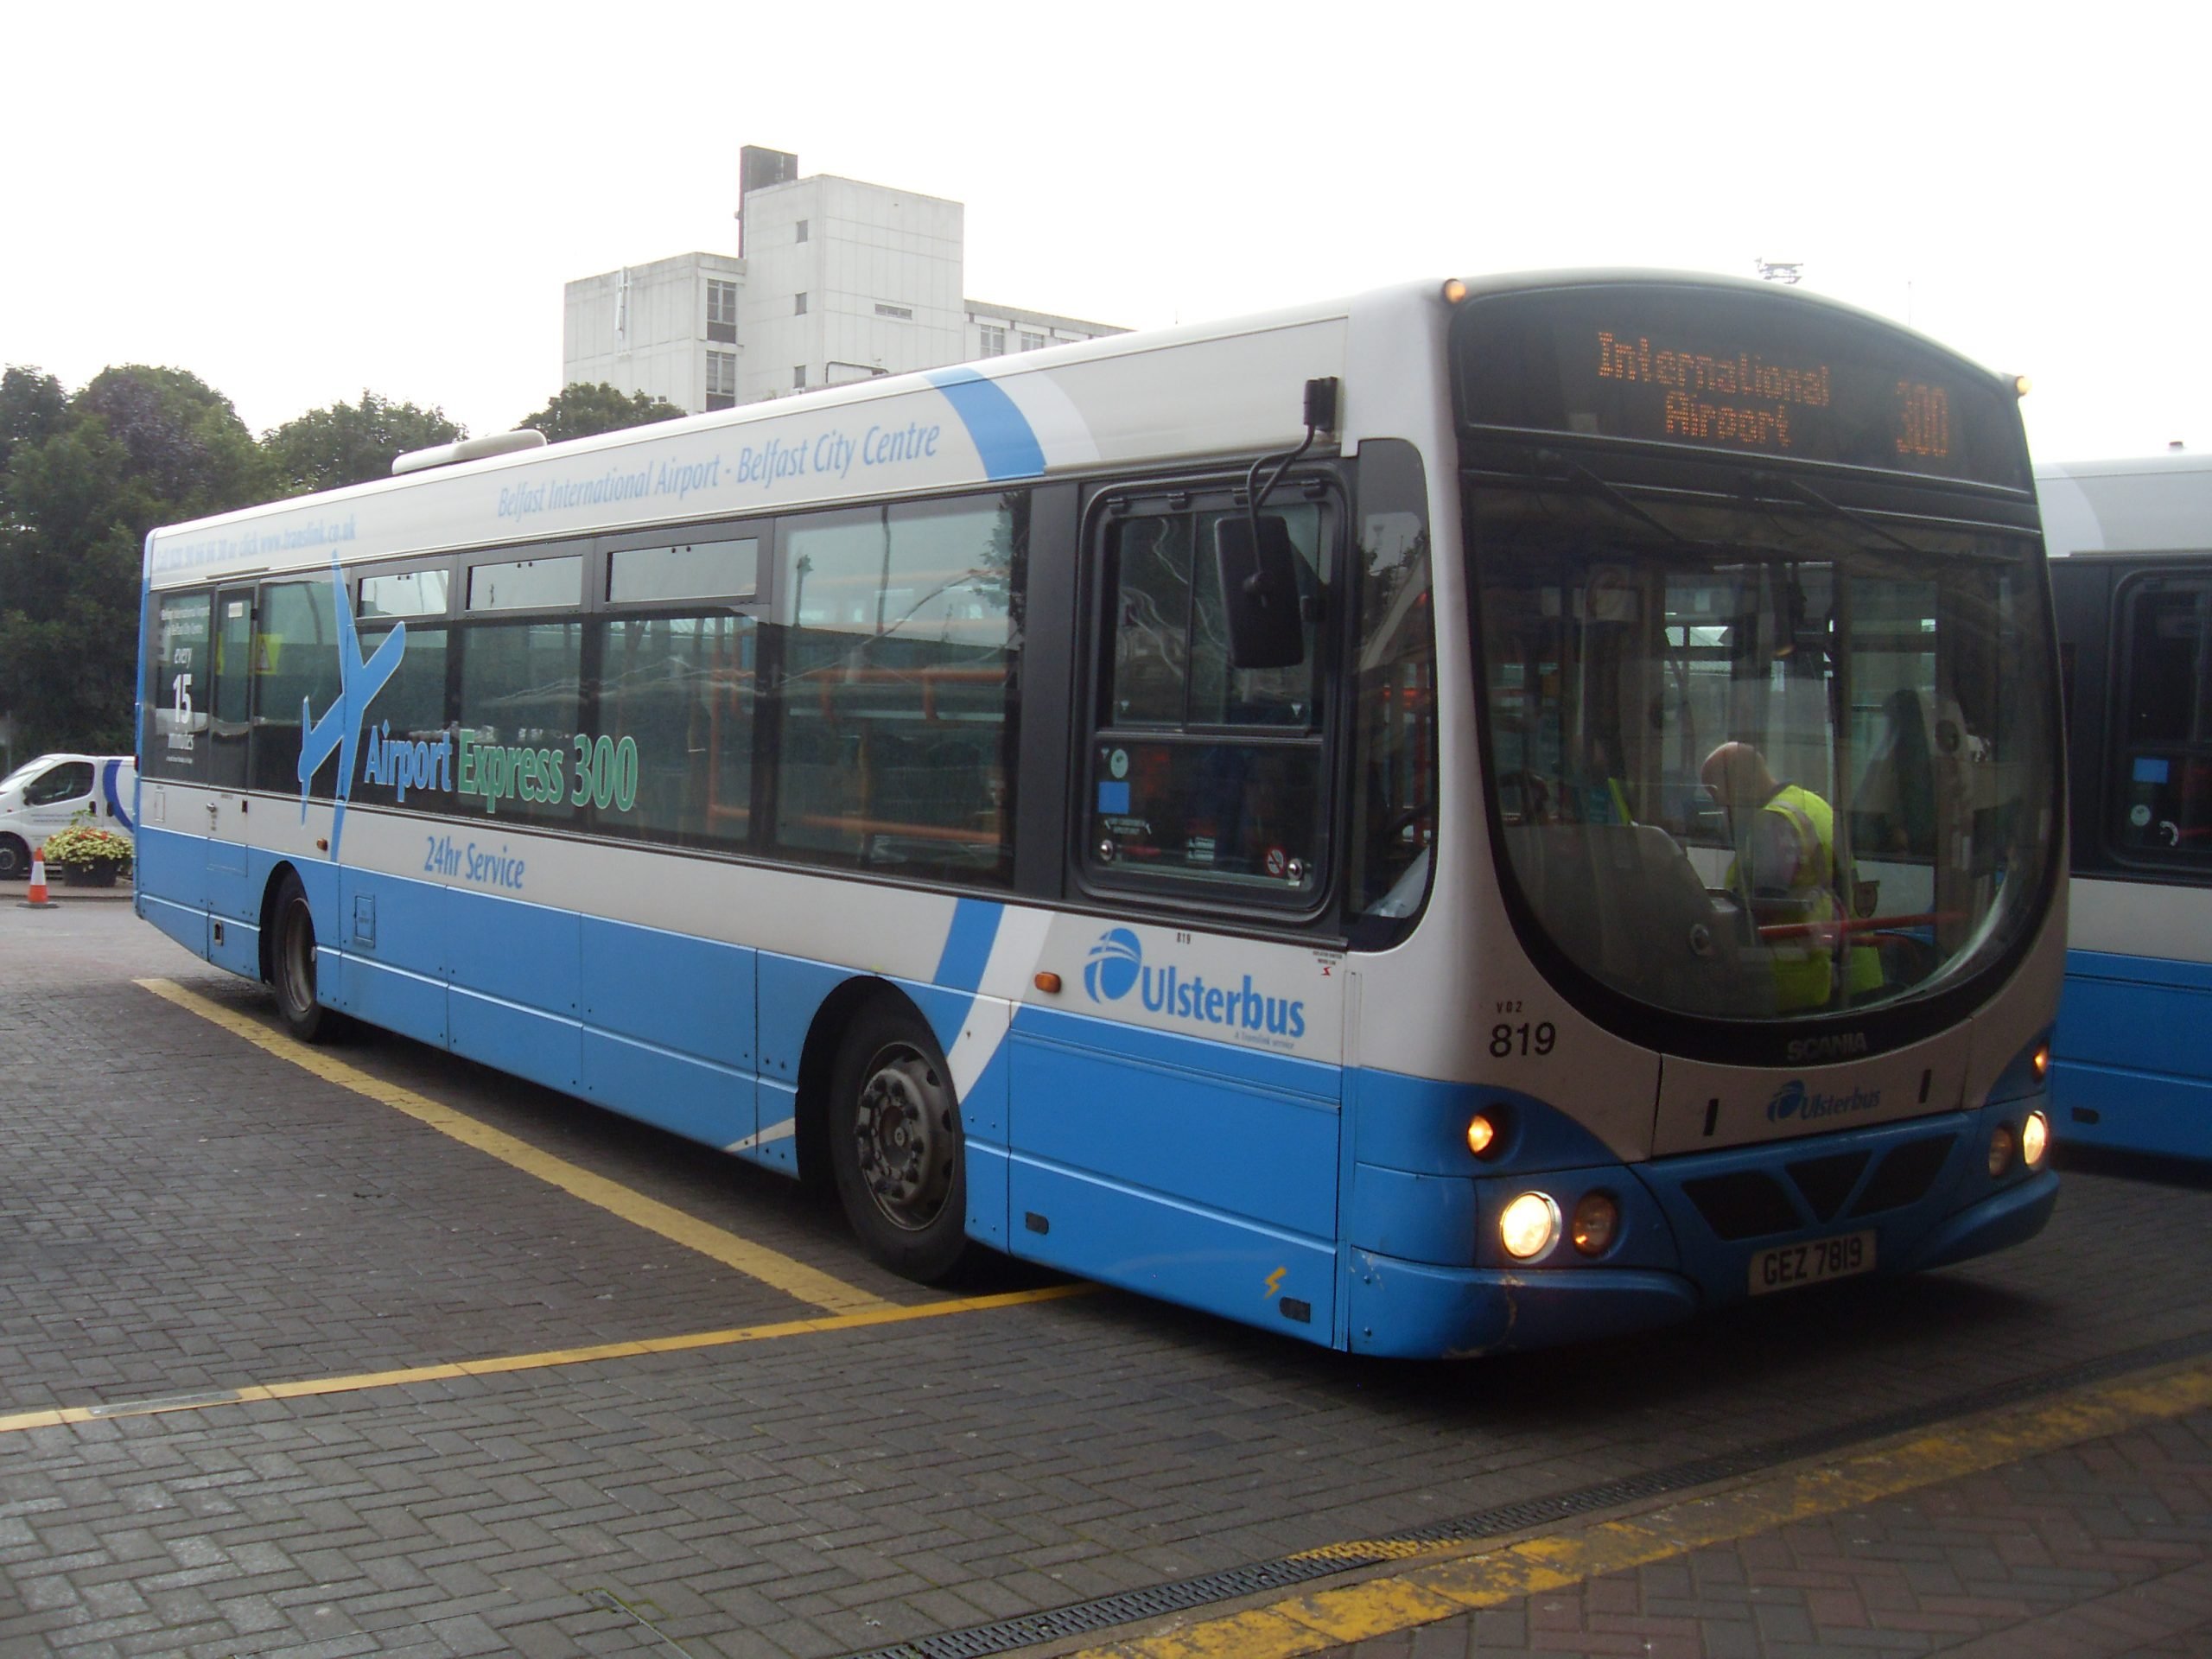 Belfast Airport Bus, How To Get From Belfast Airport To City Center - All Possible Ways